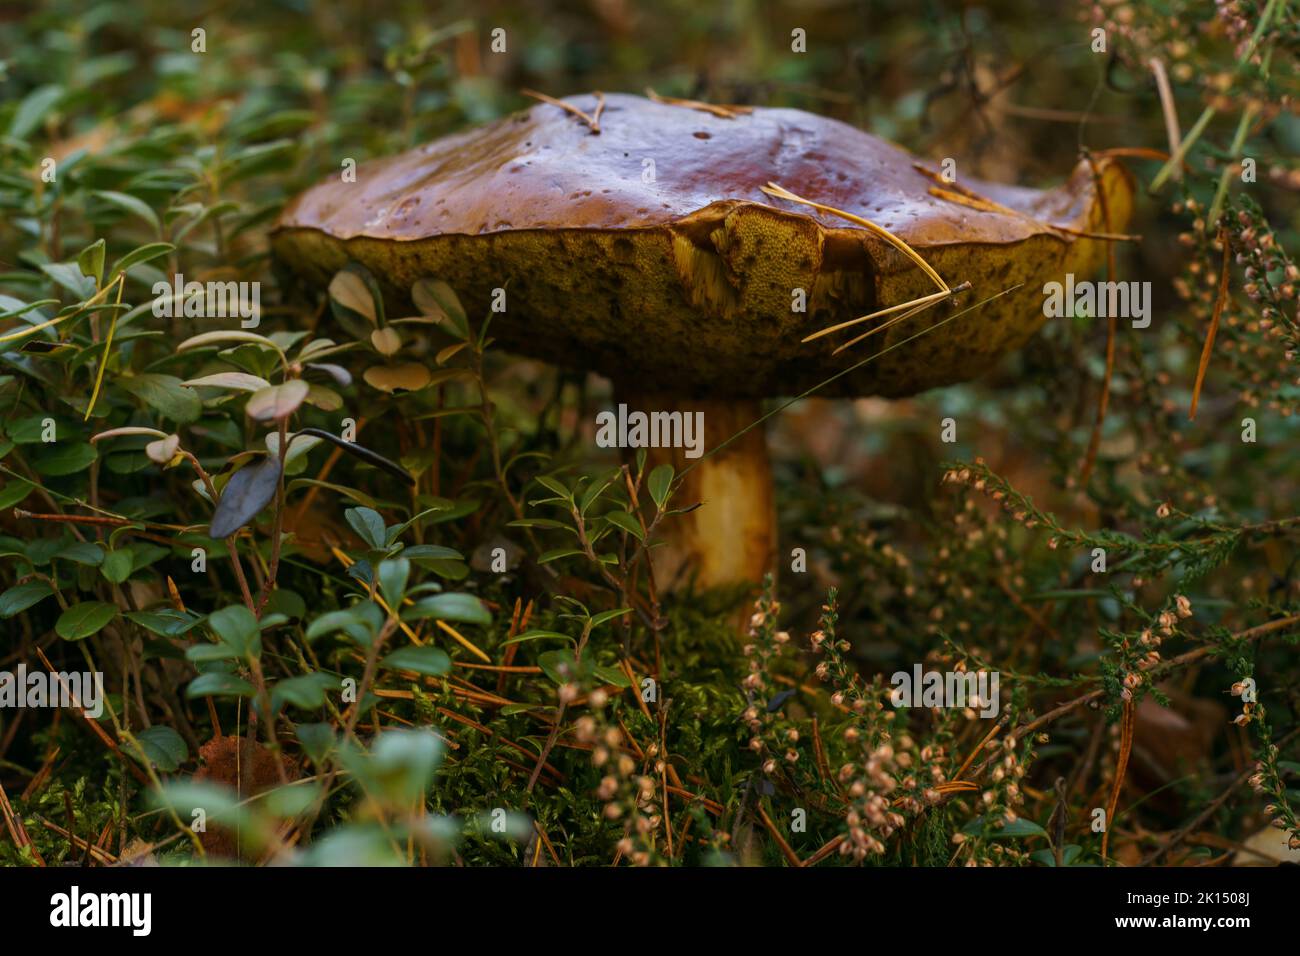 Large overgrown old rotten boletus mushroom in autumn forest near yellow leaves, lingonberry bushes, moss and heather. Nature, seasonal autumn forest Stock Photo